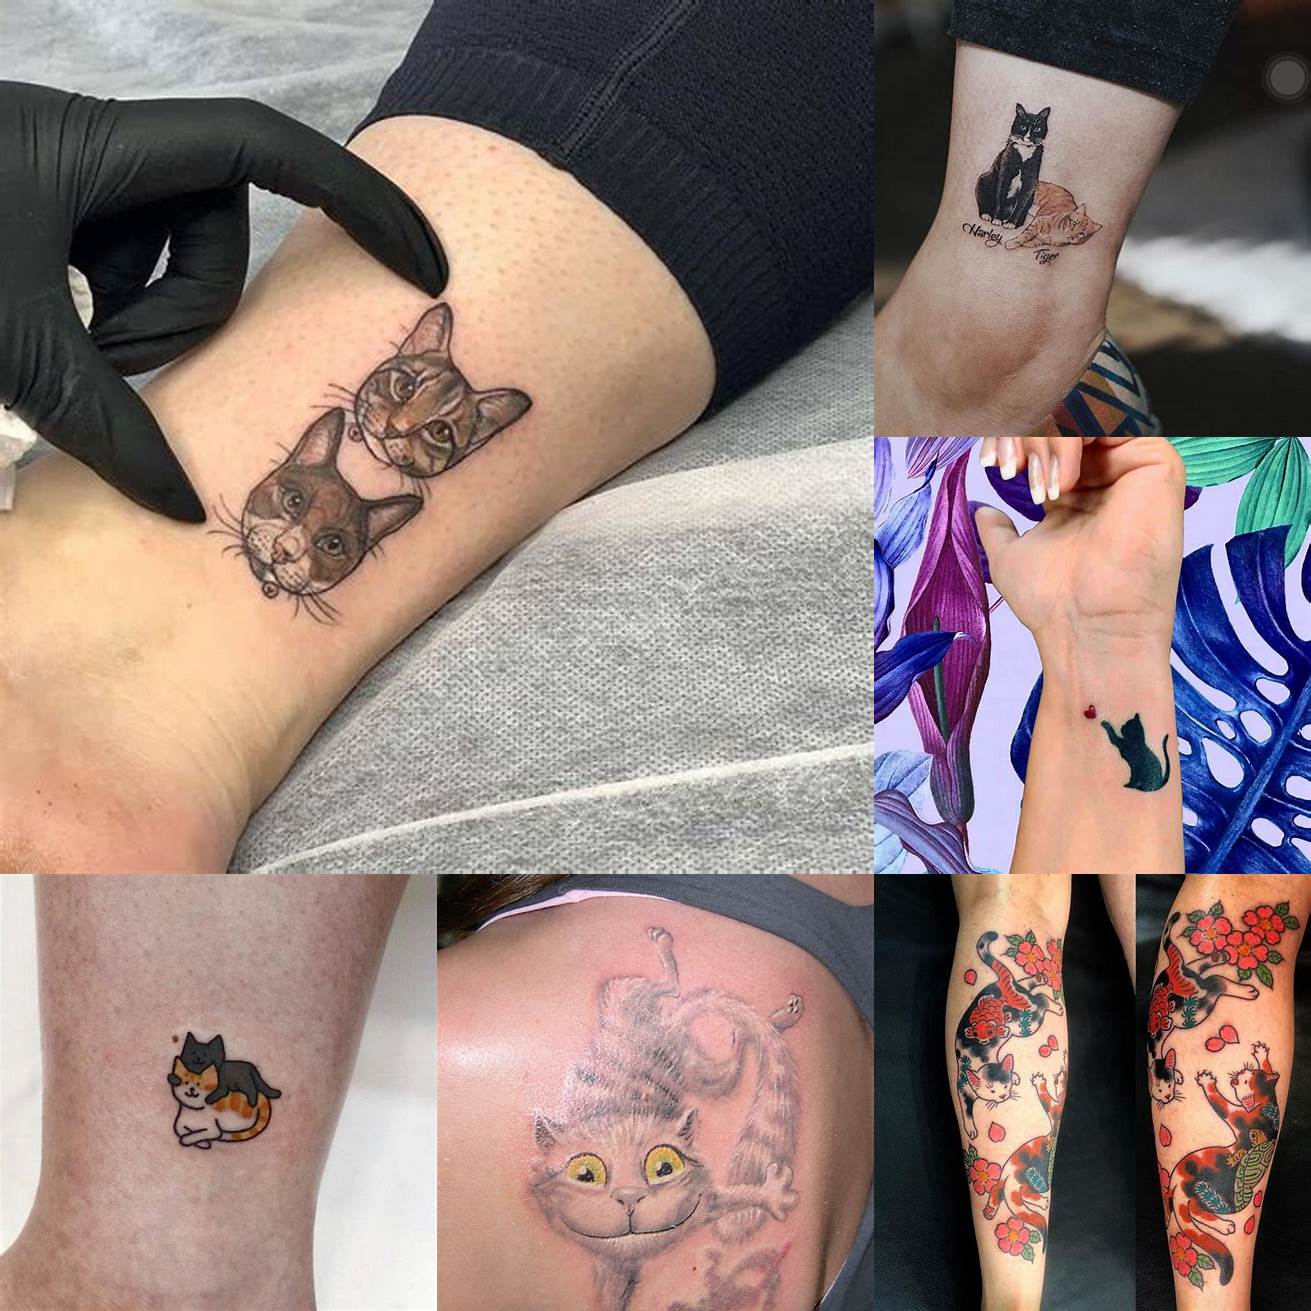 Show off your tattoo with confidence